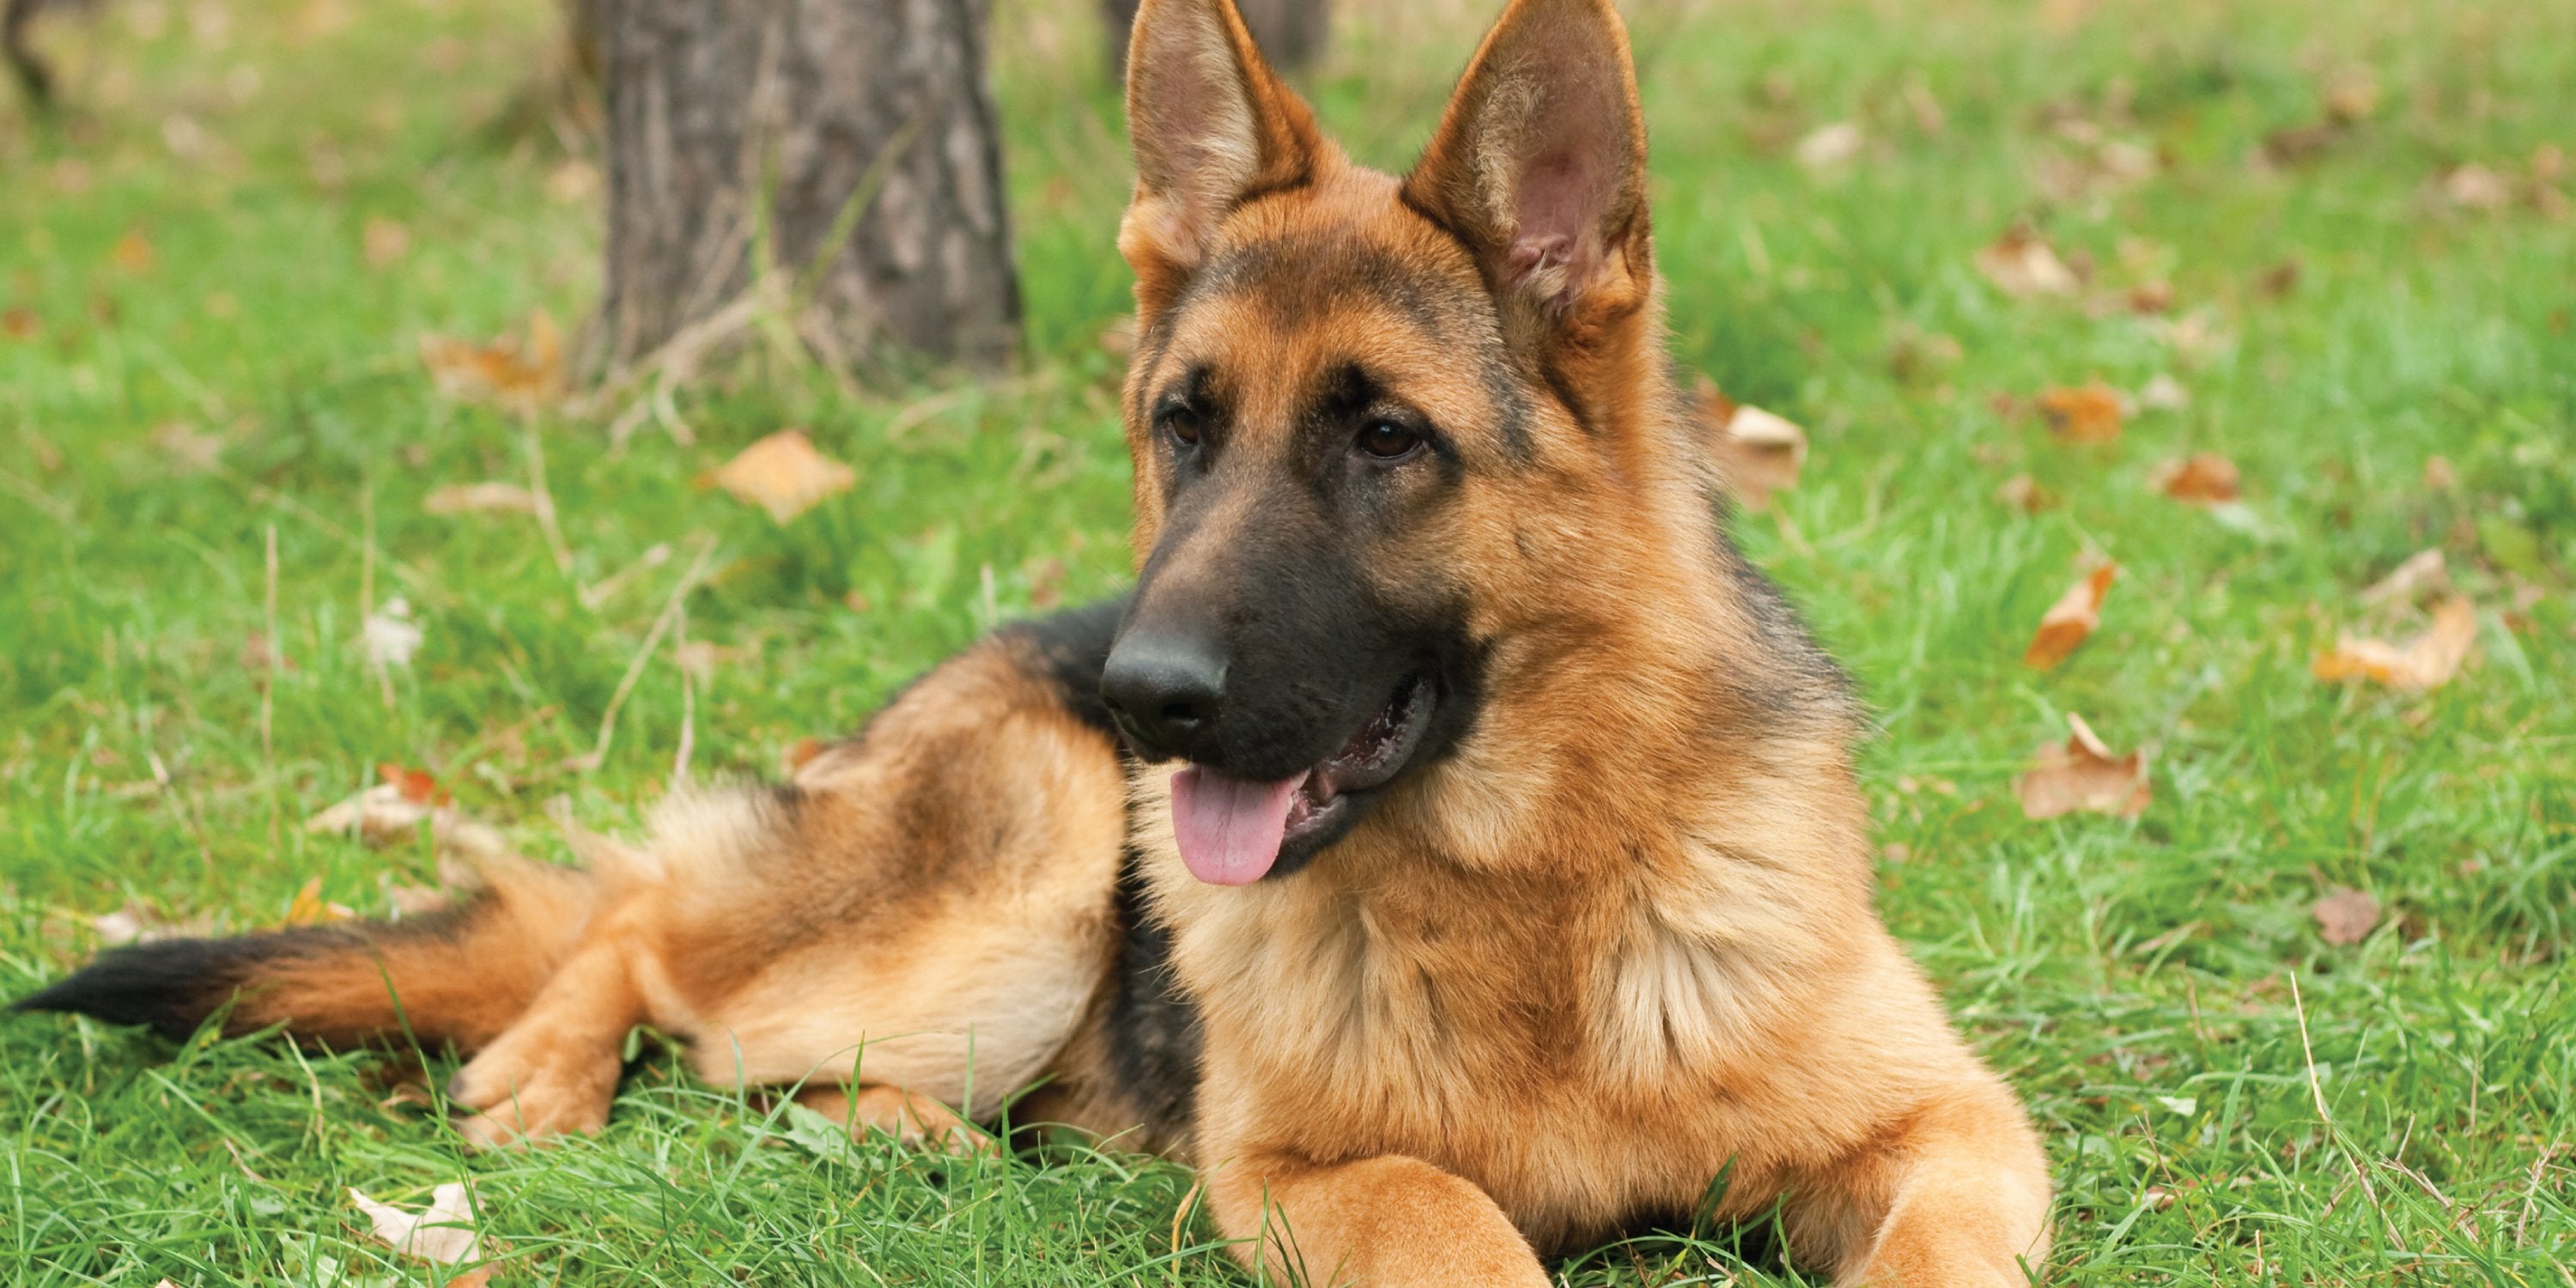 how do i know if my dog needs digestive enzymes